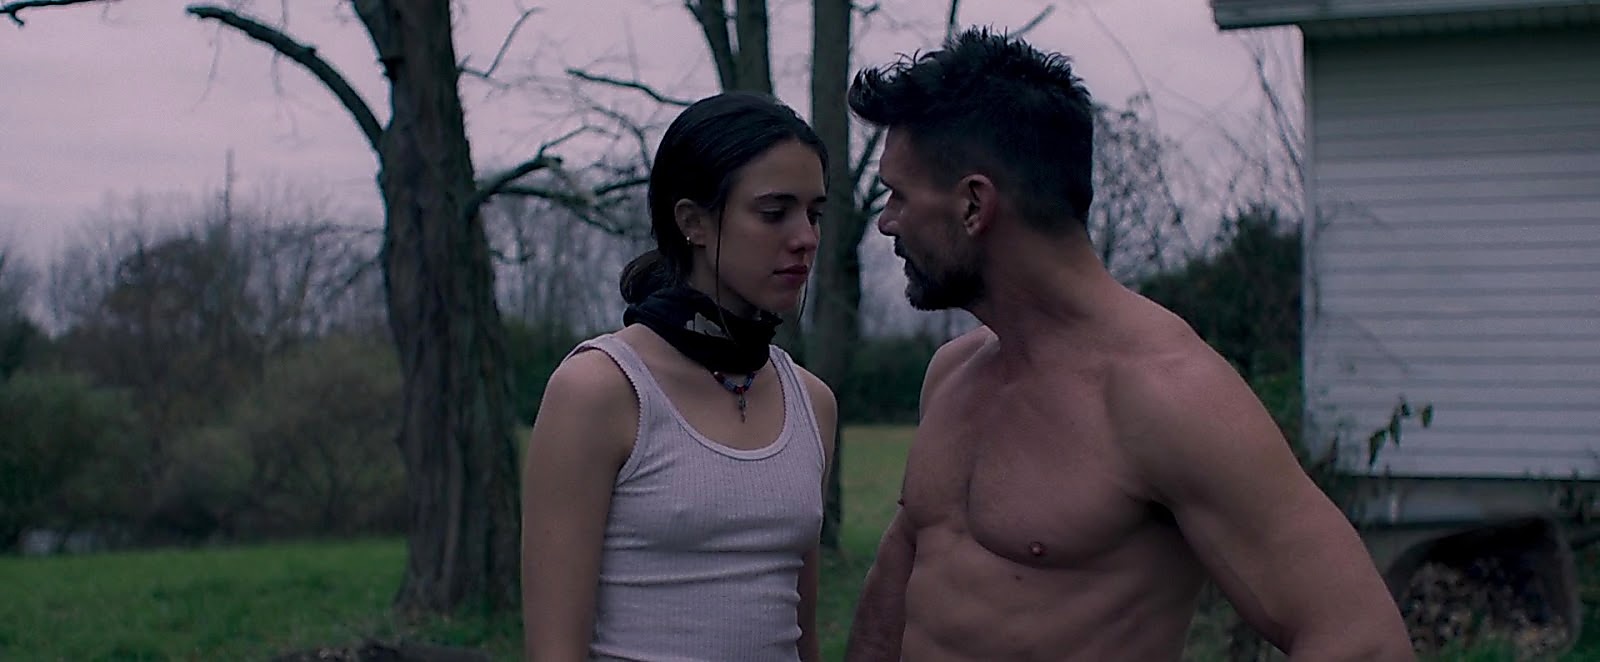 Frank Grillo sexy shirtless scene February 23, 2019, 1pm